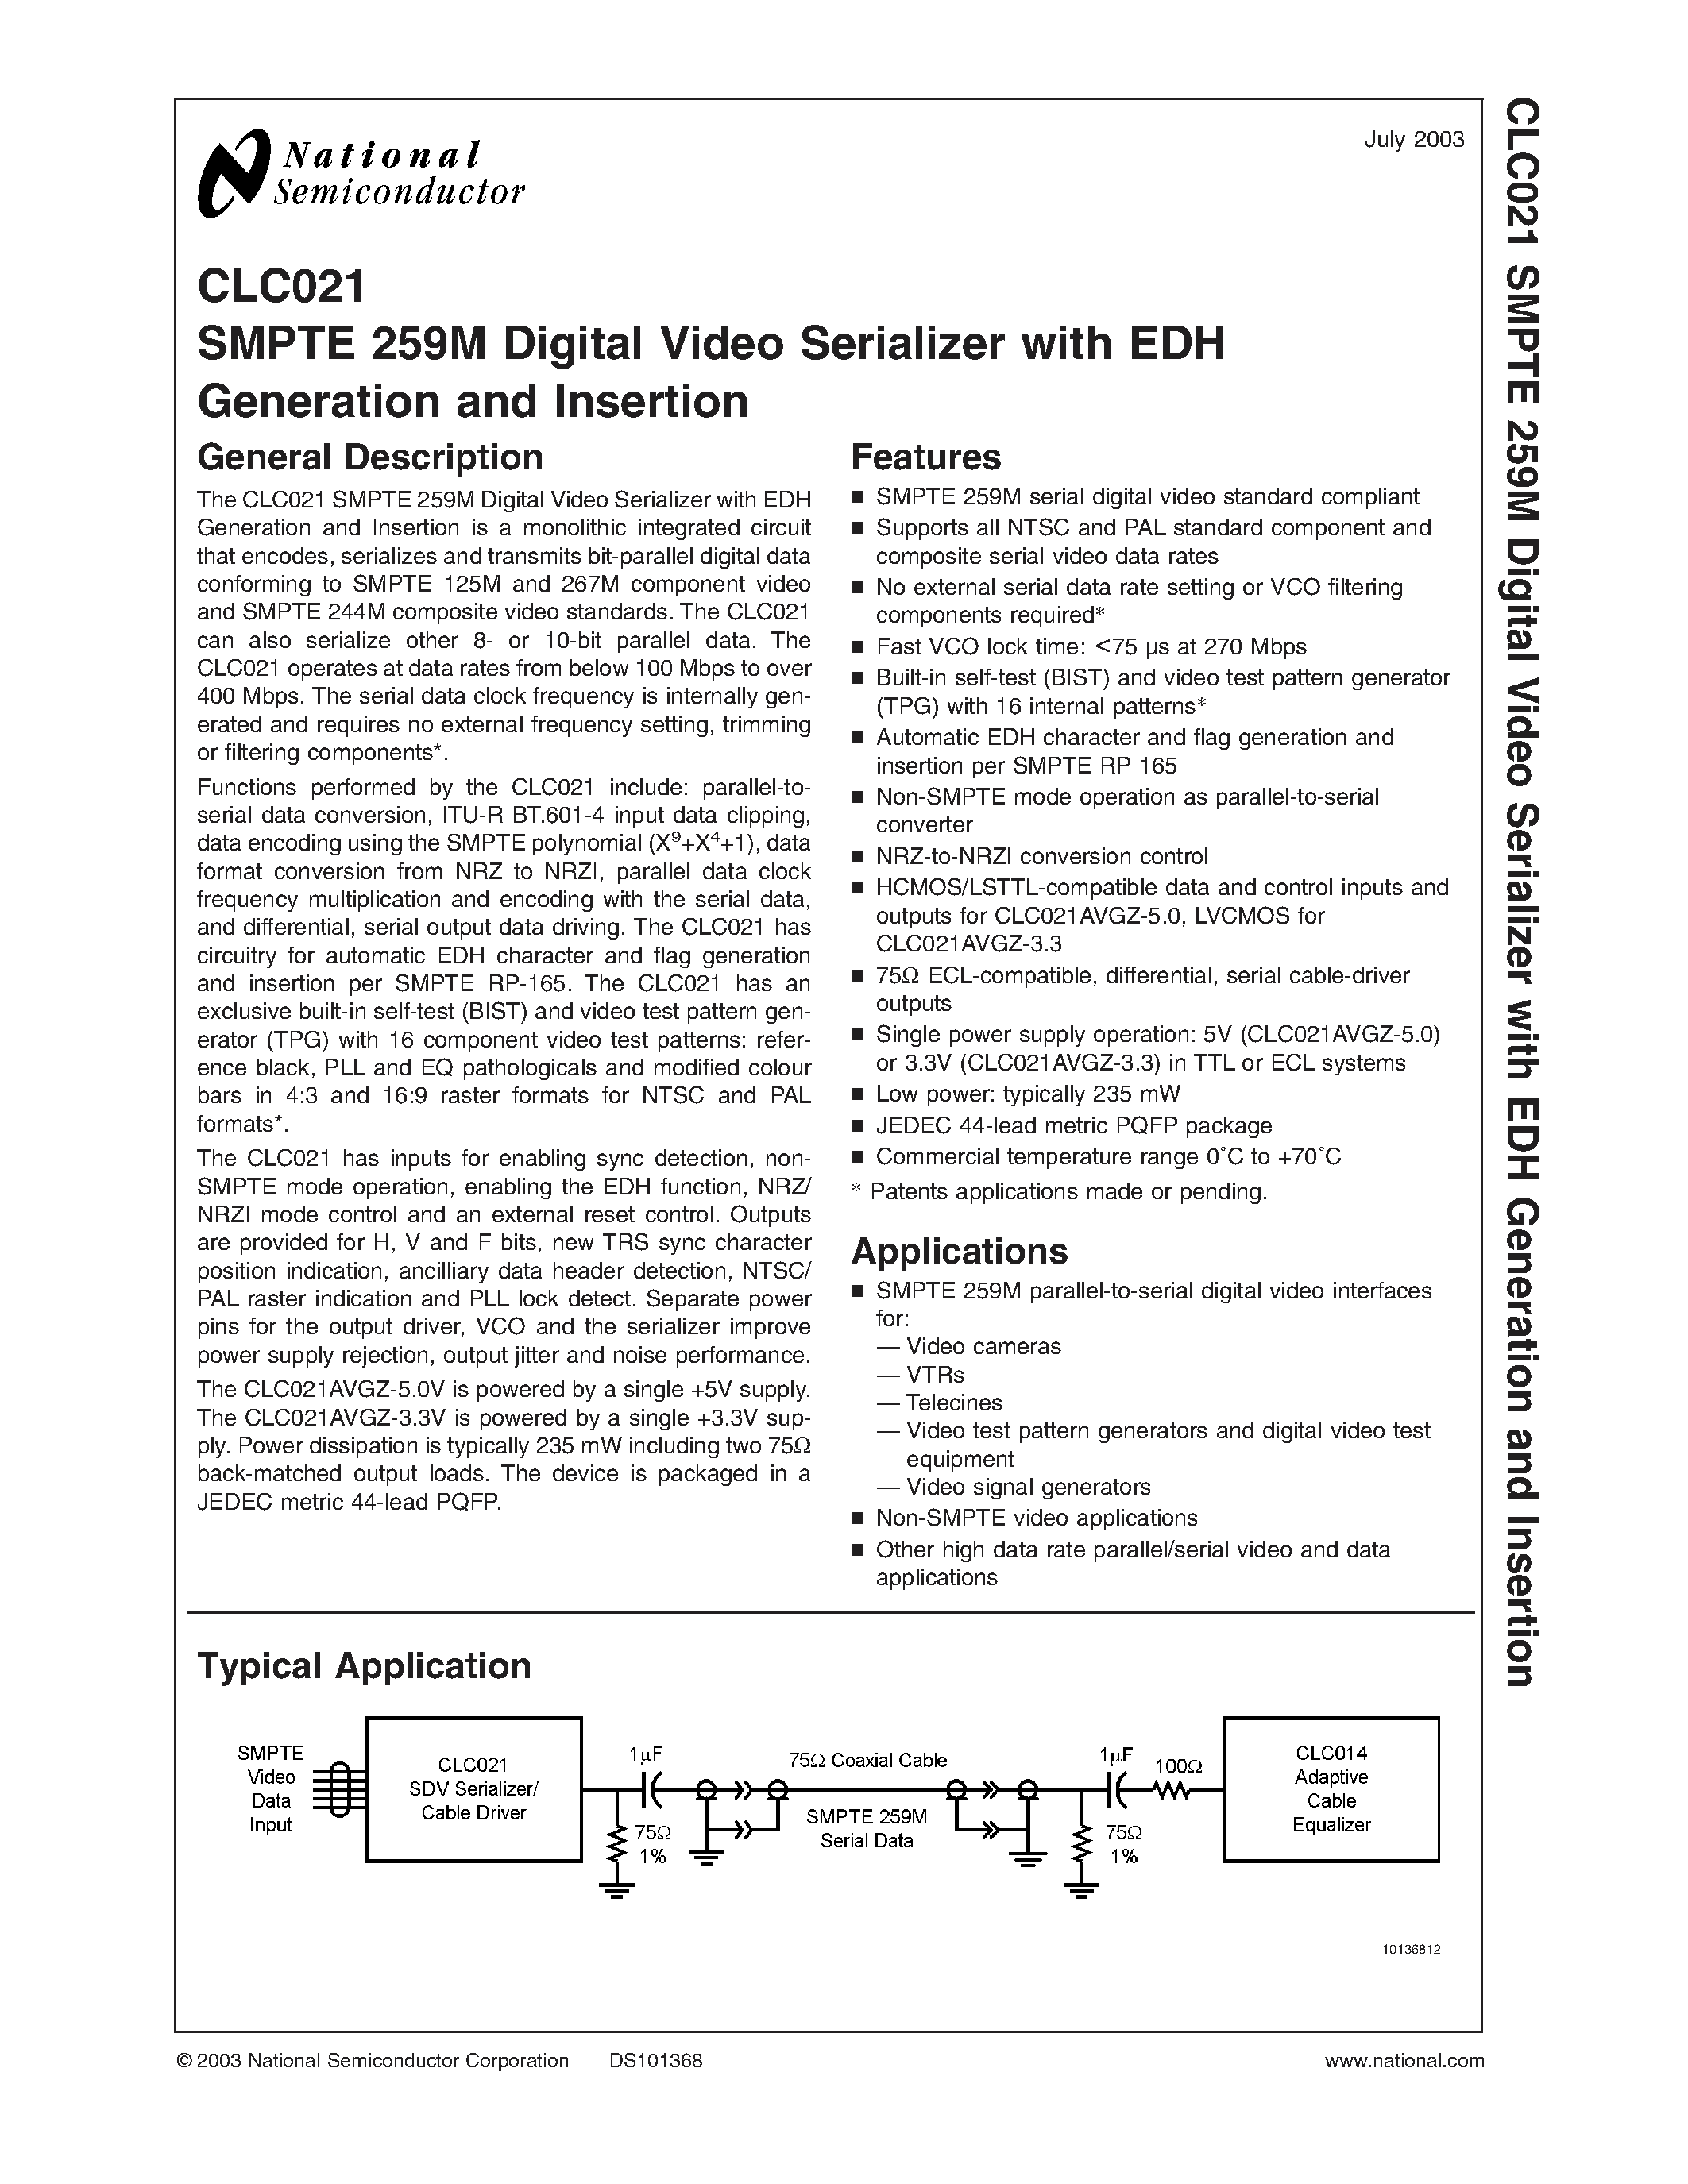 Datasheet CLC021 - SMPTE 259M Digital Video Serializer with EDH Generation and Insertion page 1